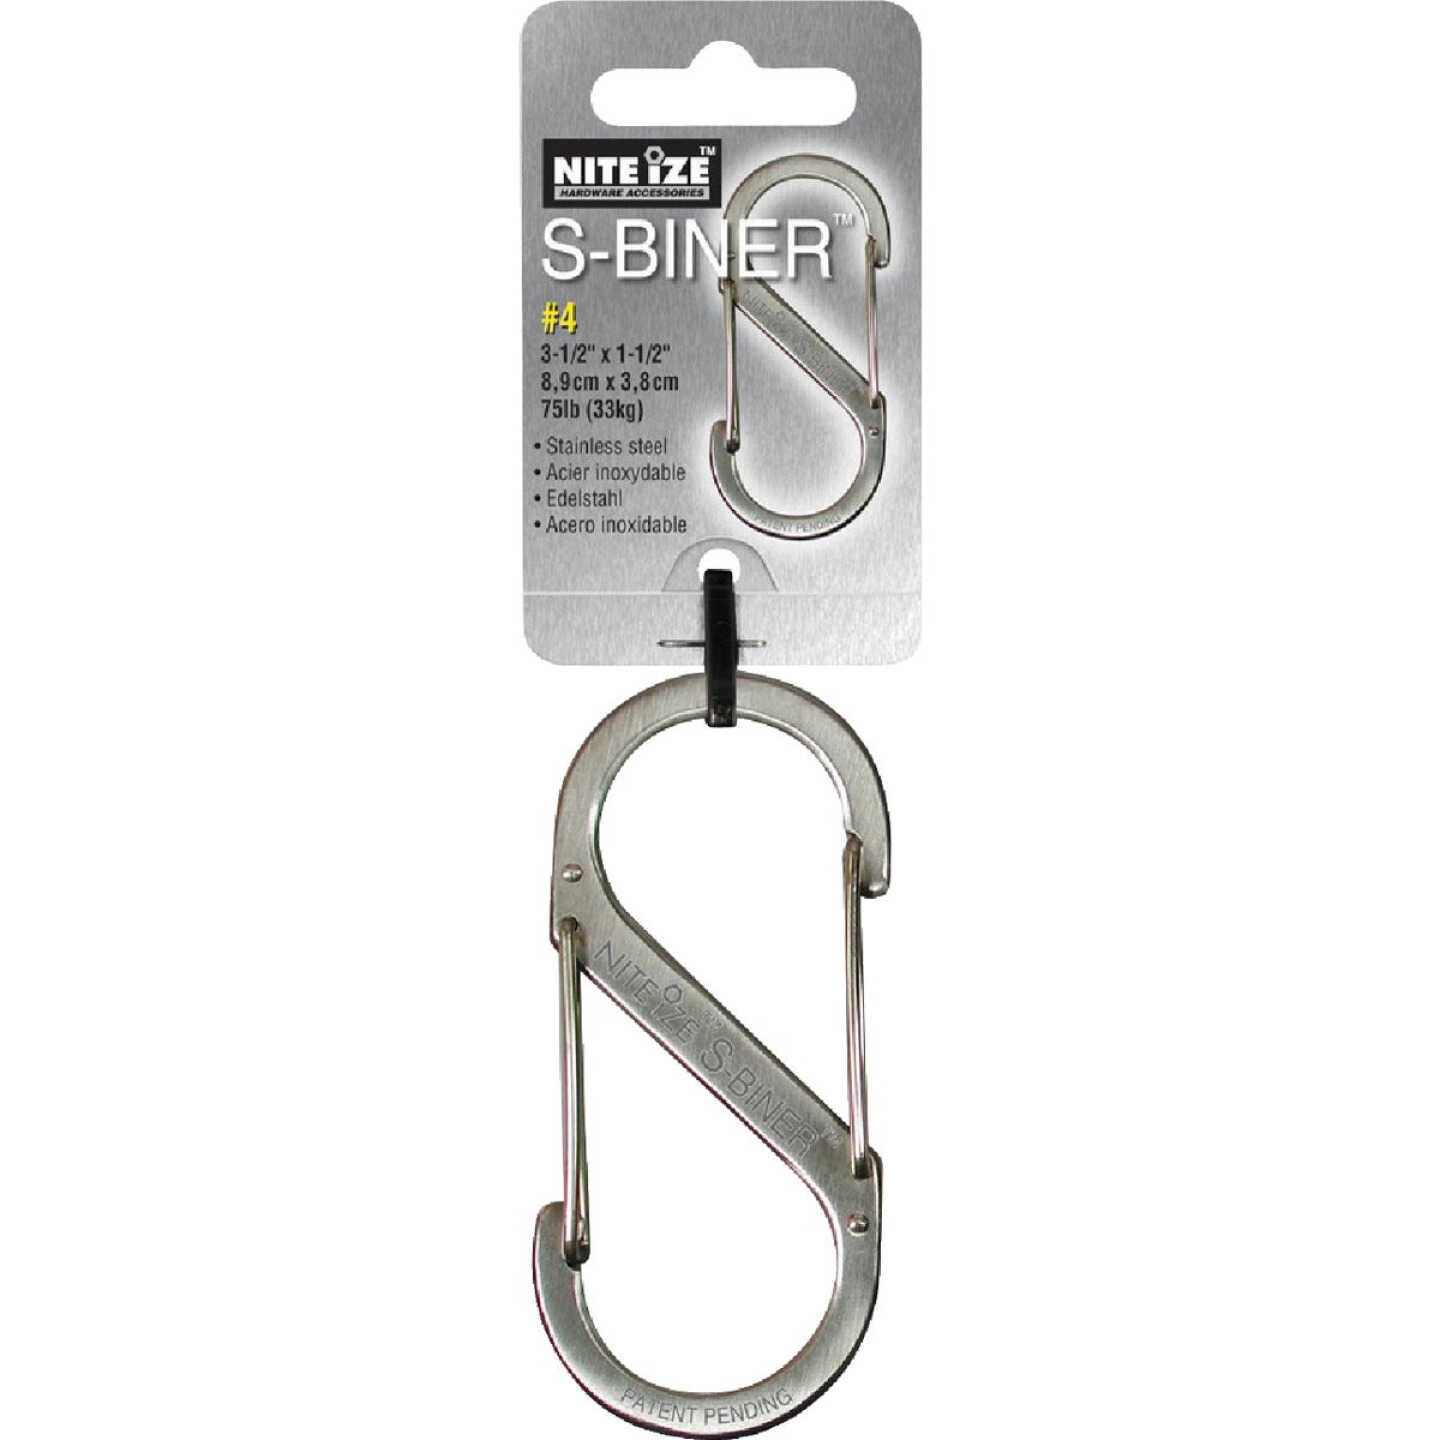 Nite Ize S-Biner Size 2 10 Lb. Capacity Stainless Steel S-Clip Key Ring -  Anderson Lumber